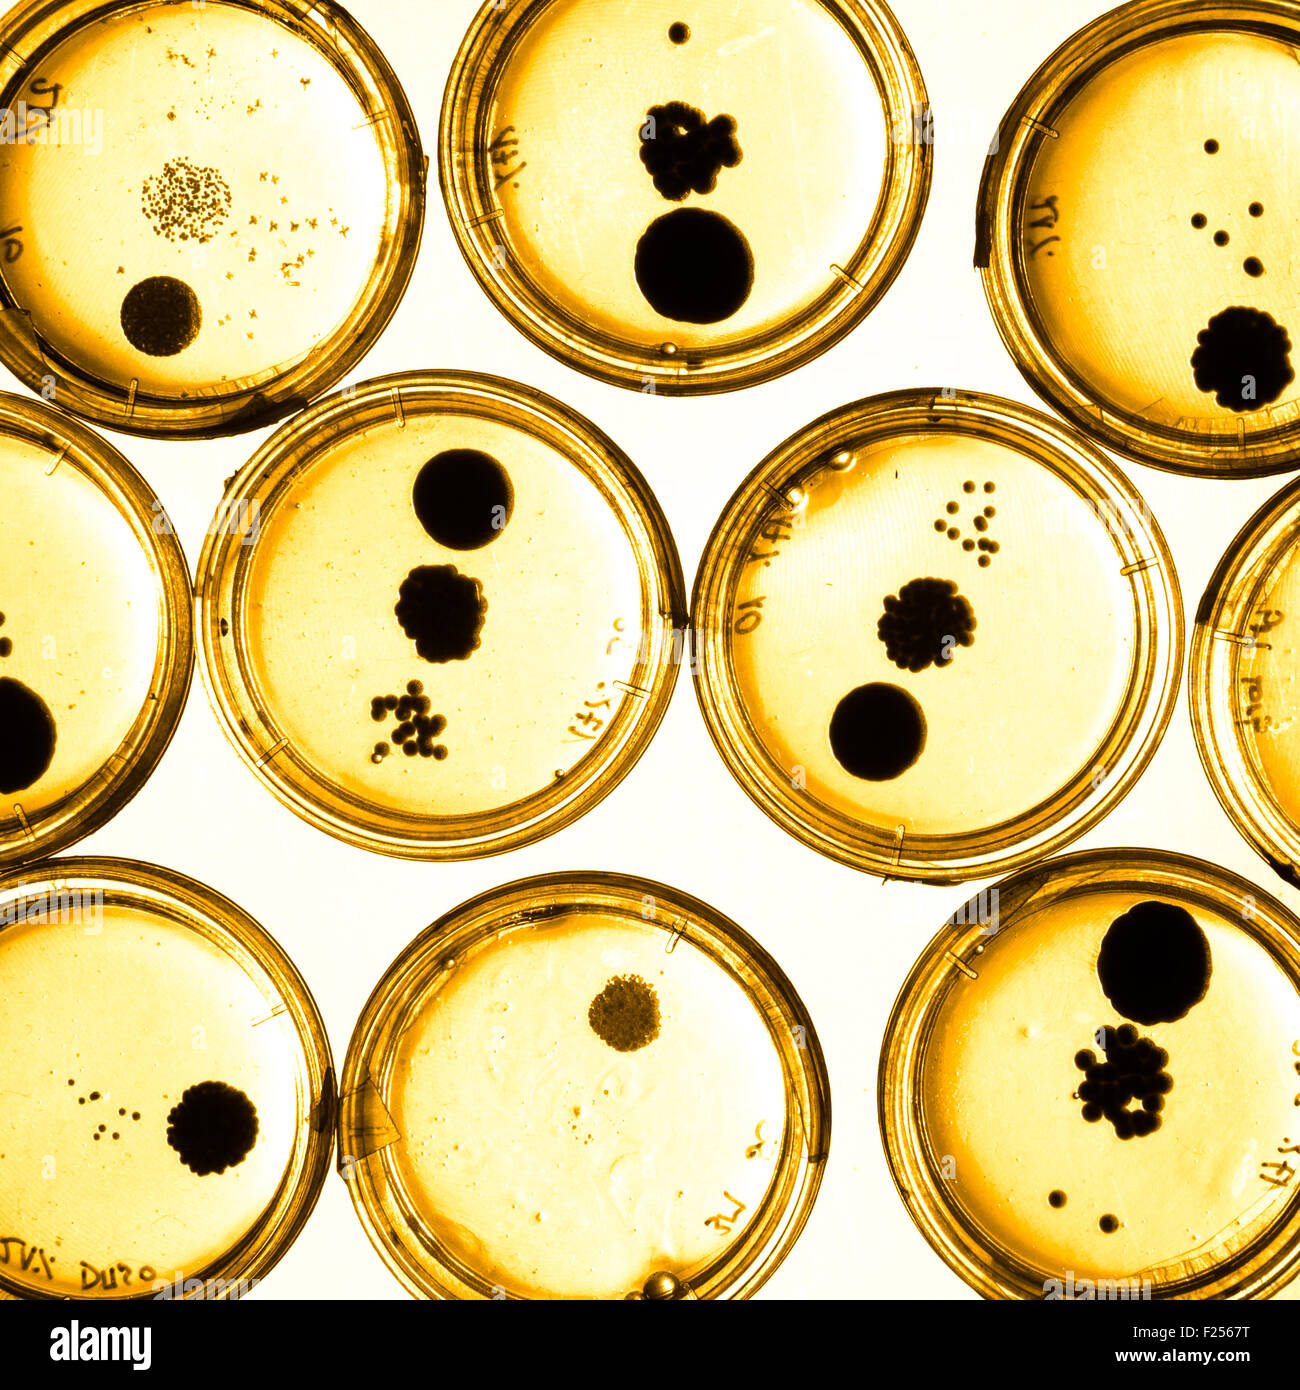 Growing Bacteria in Petri Dishes. Stock Photo